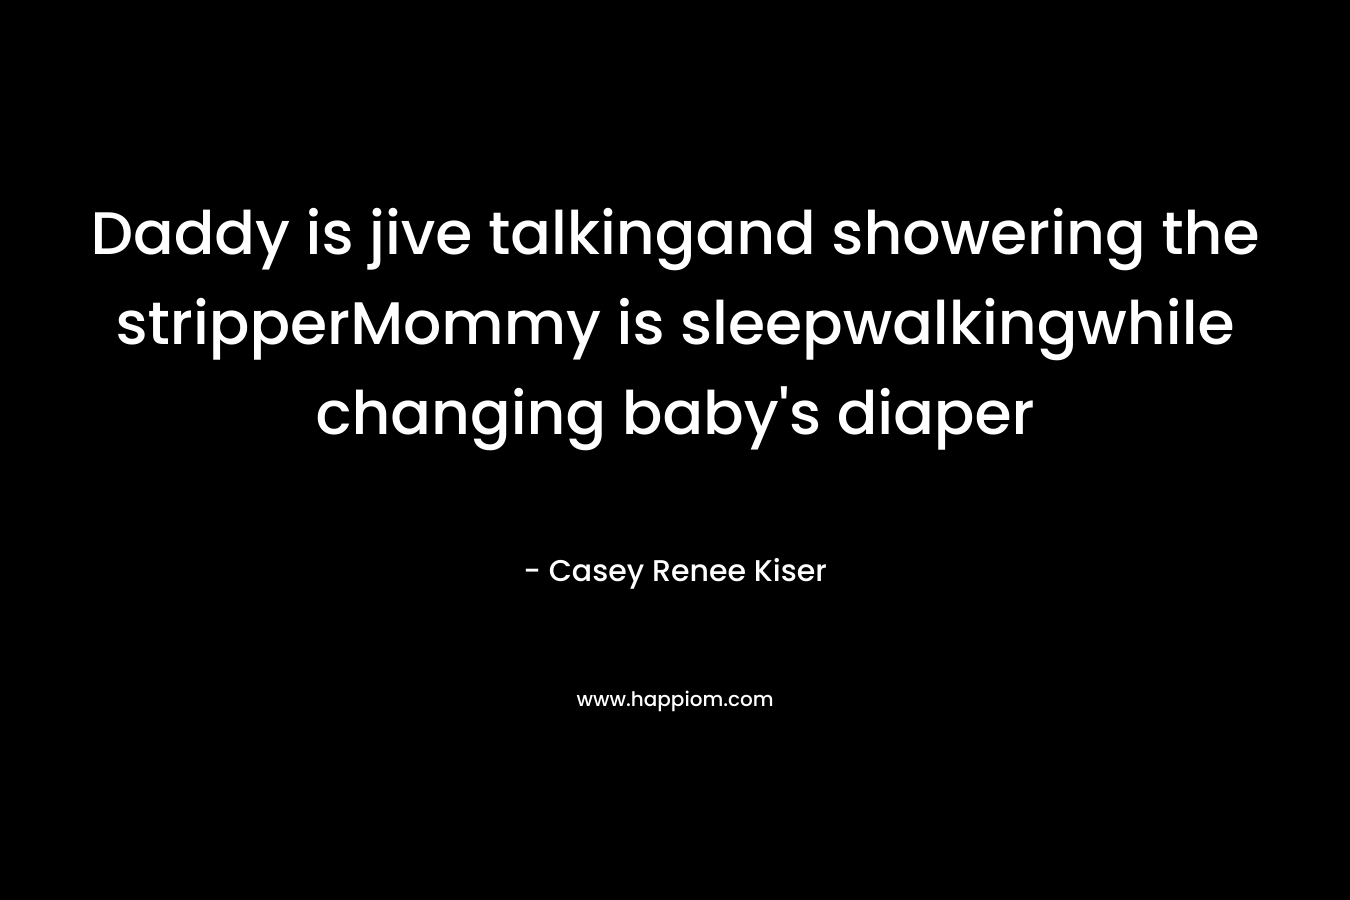 Daddy is jive talkingand showering the stripperMommy is sleepwalkingwhile changing baby’s diaper – Casey Renee Kiser